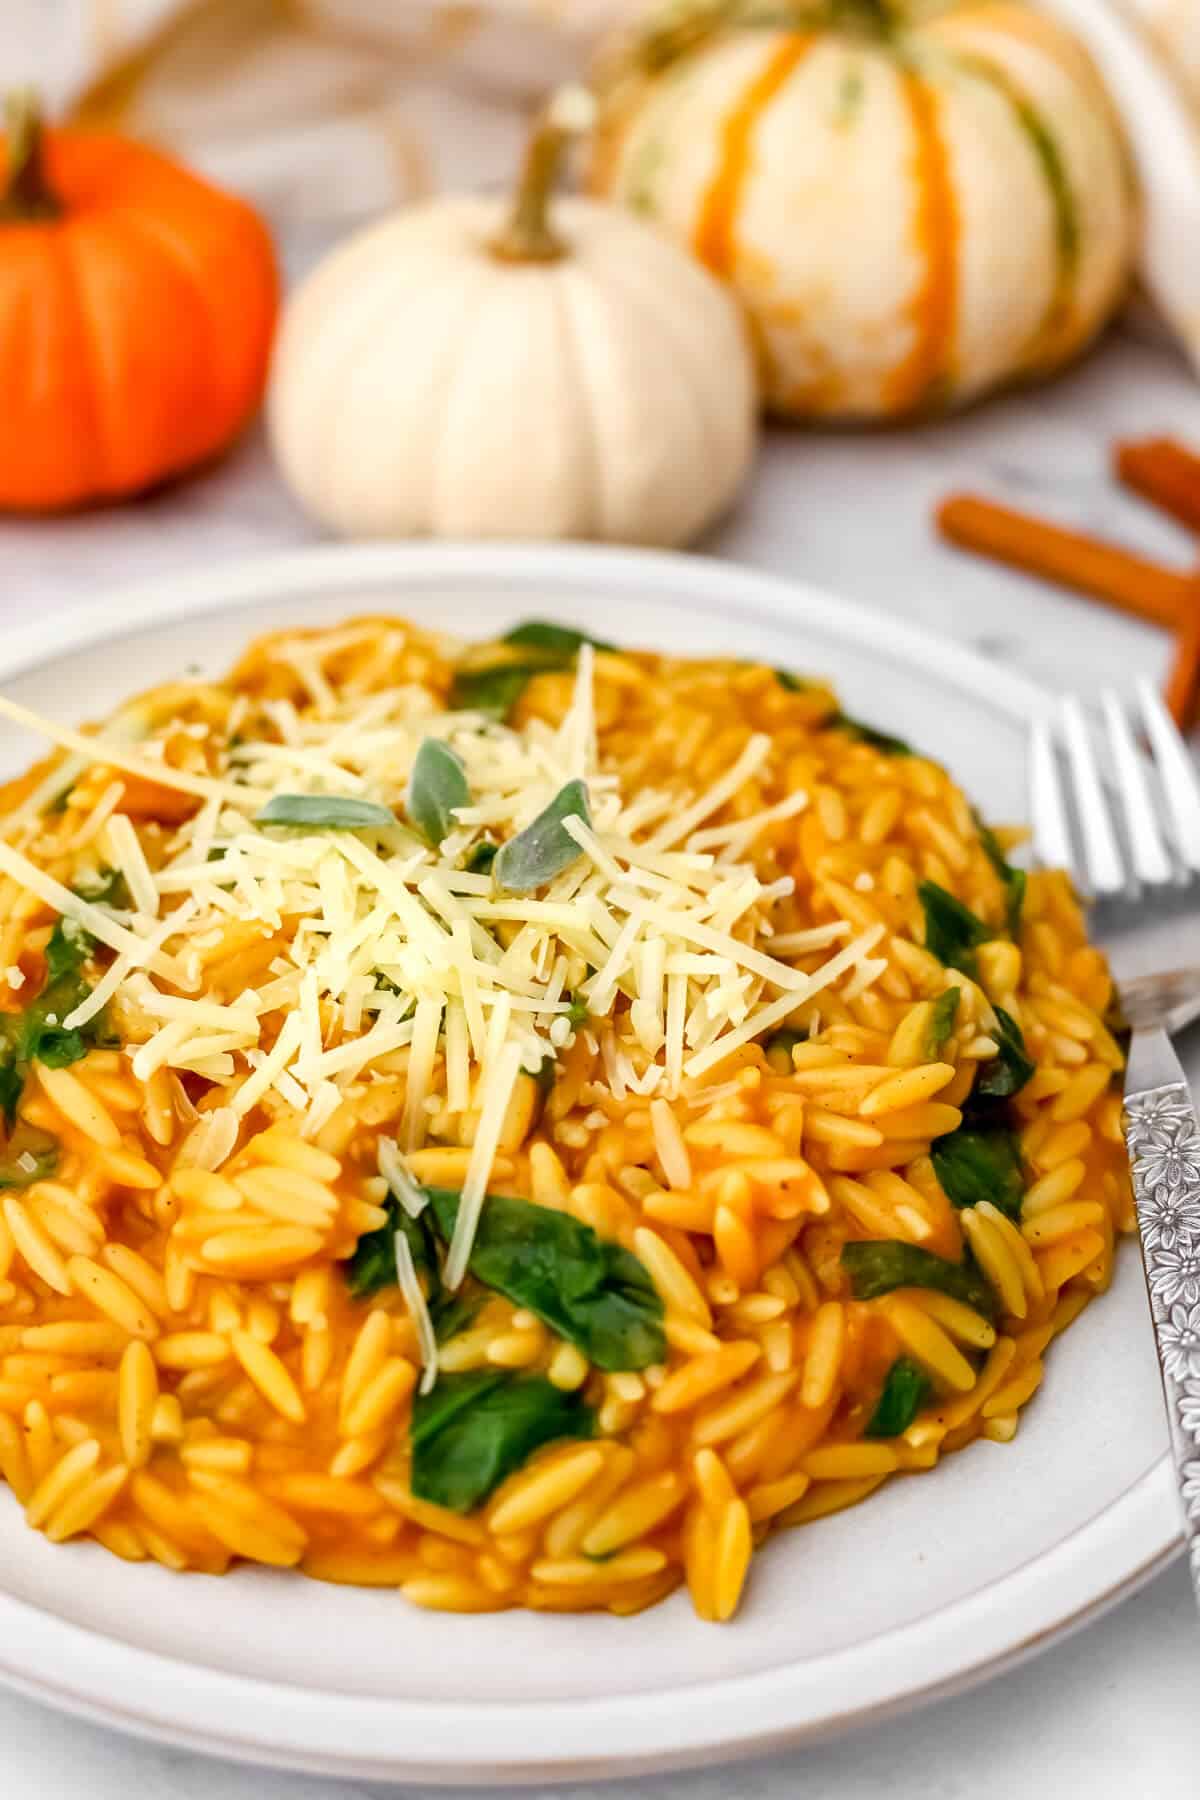 A white plate filled with pumpkin orzo sprinkled with shredded parmesan cheese with little pumpkins in the background.